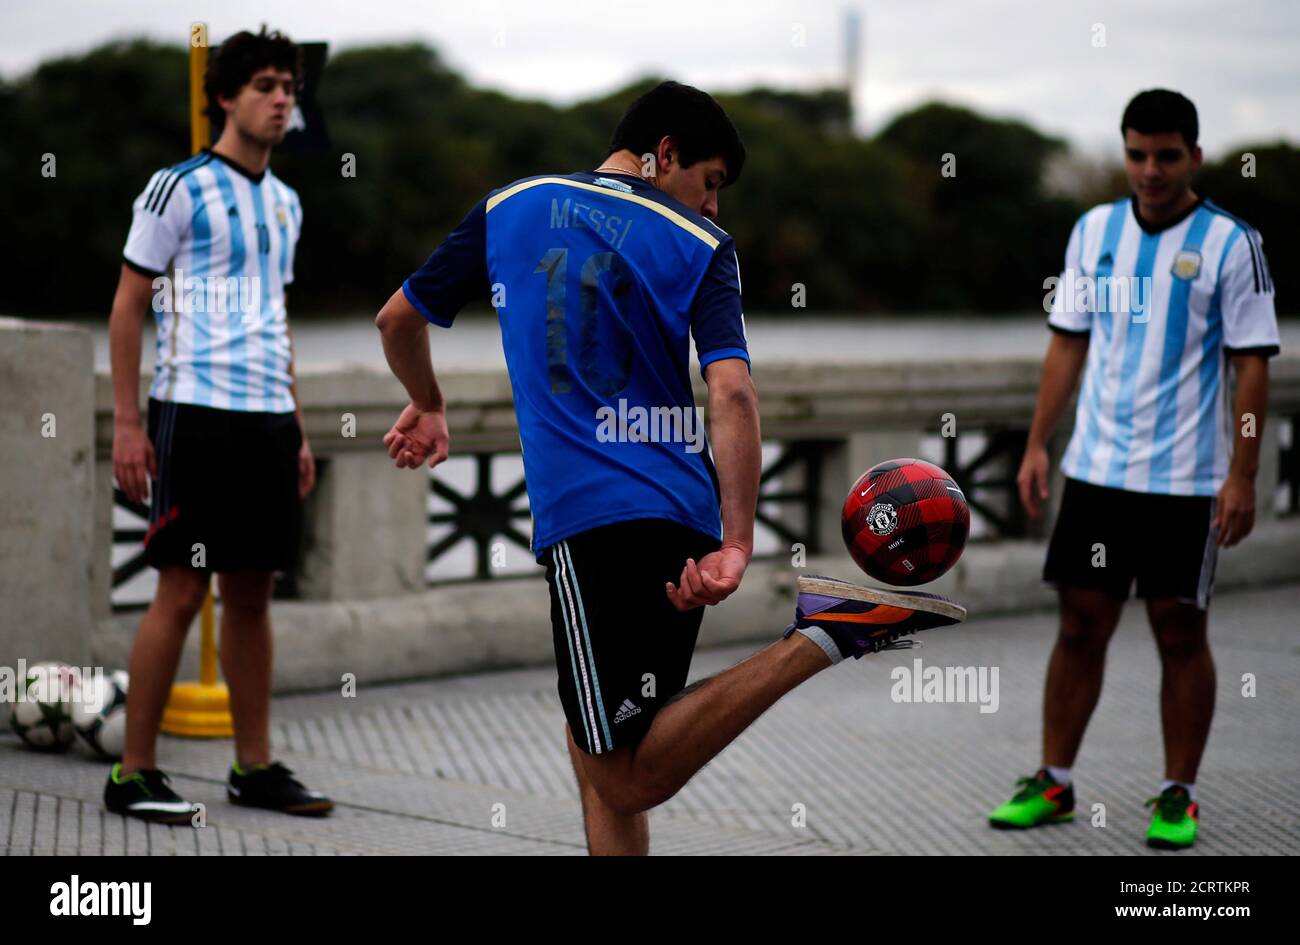 A boy wearing a Messi jersey plays with a ball before the unveiling of a statue